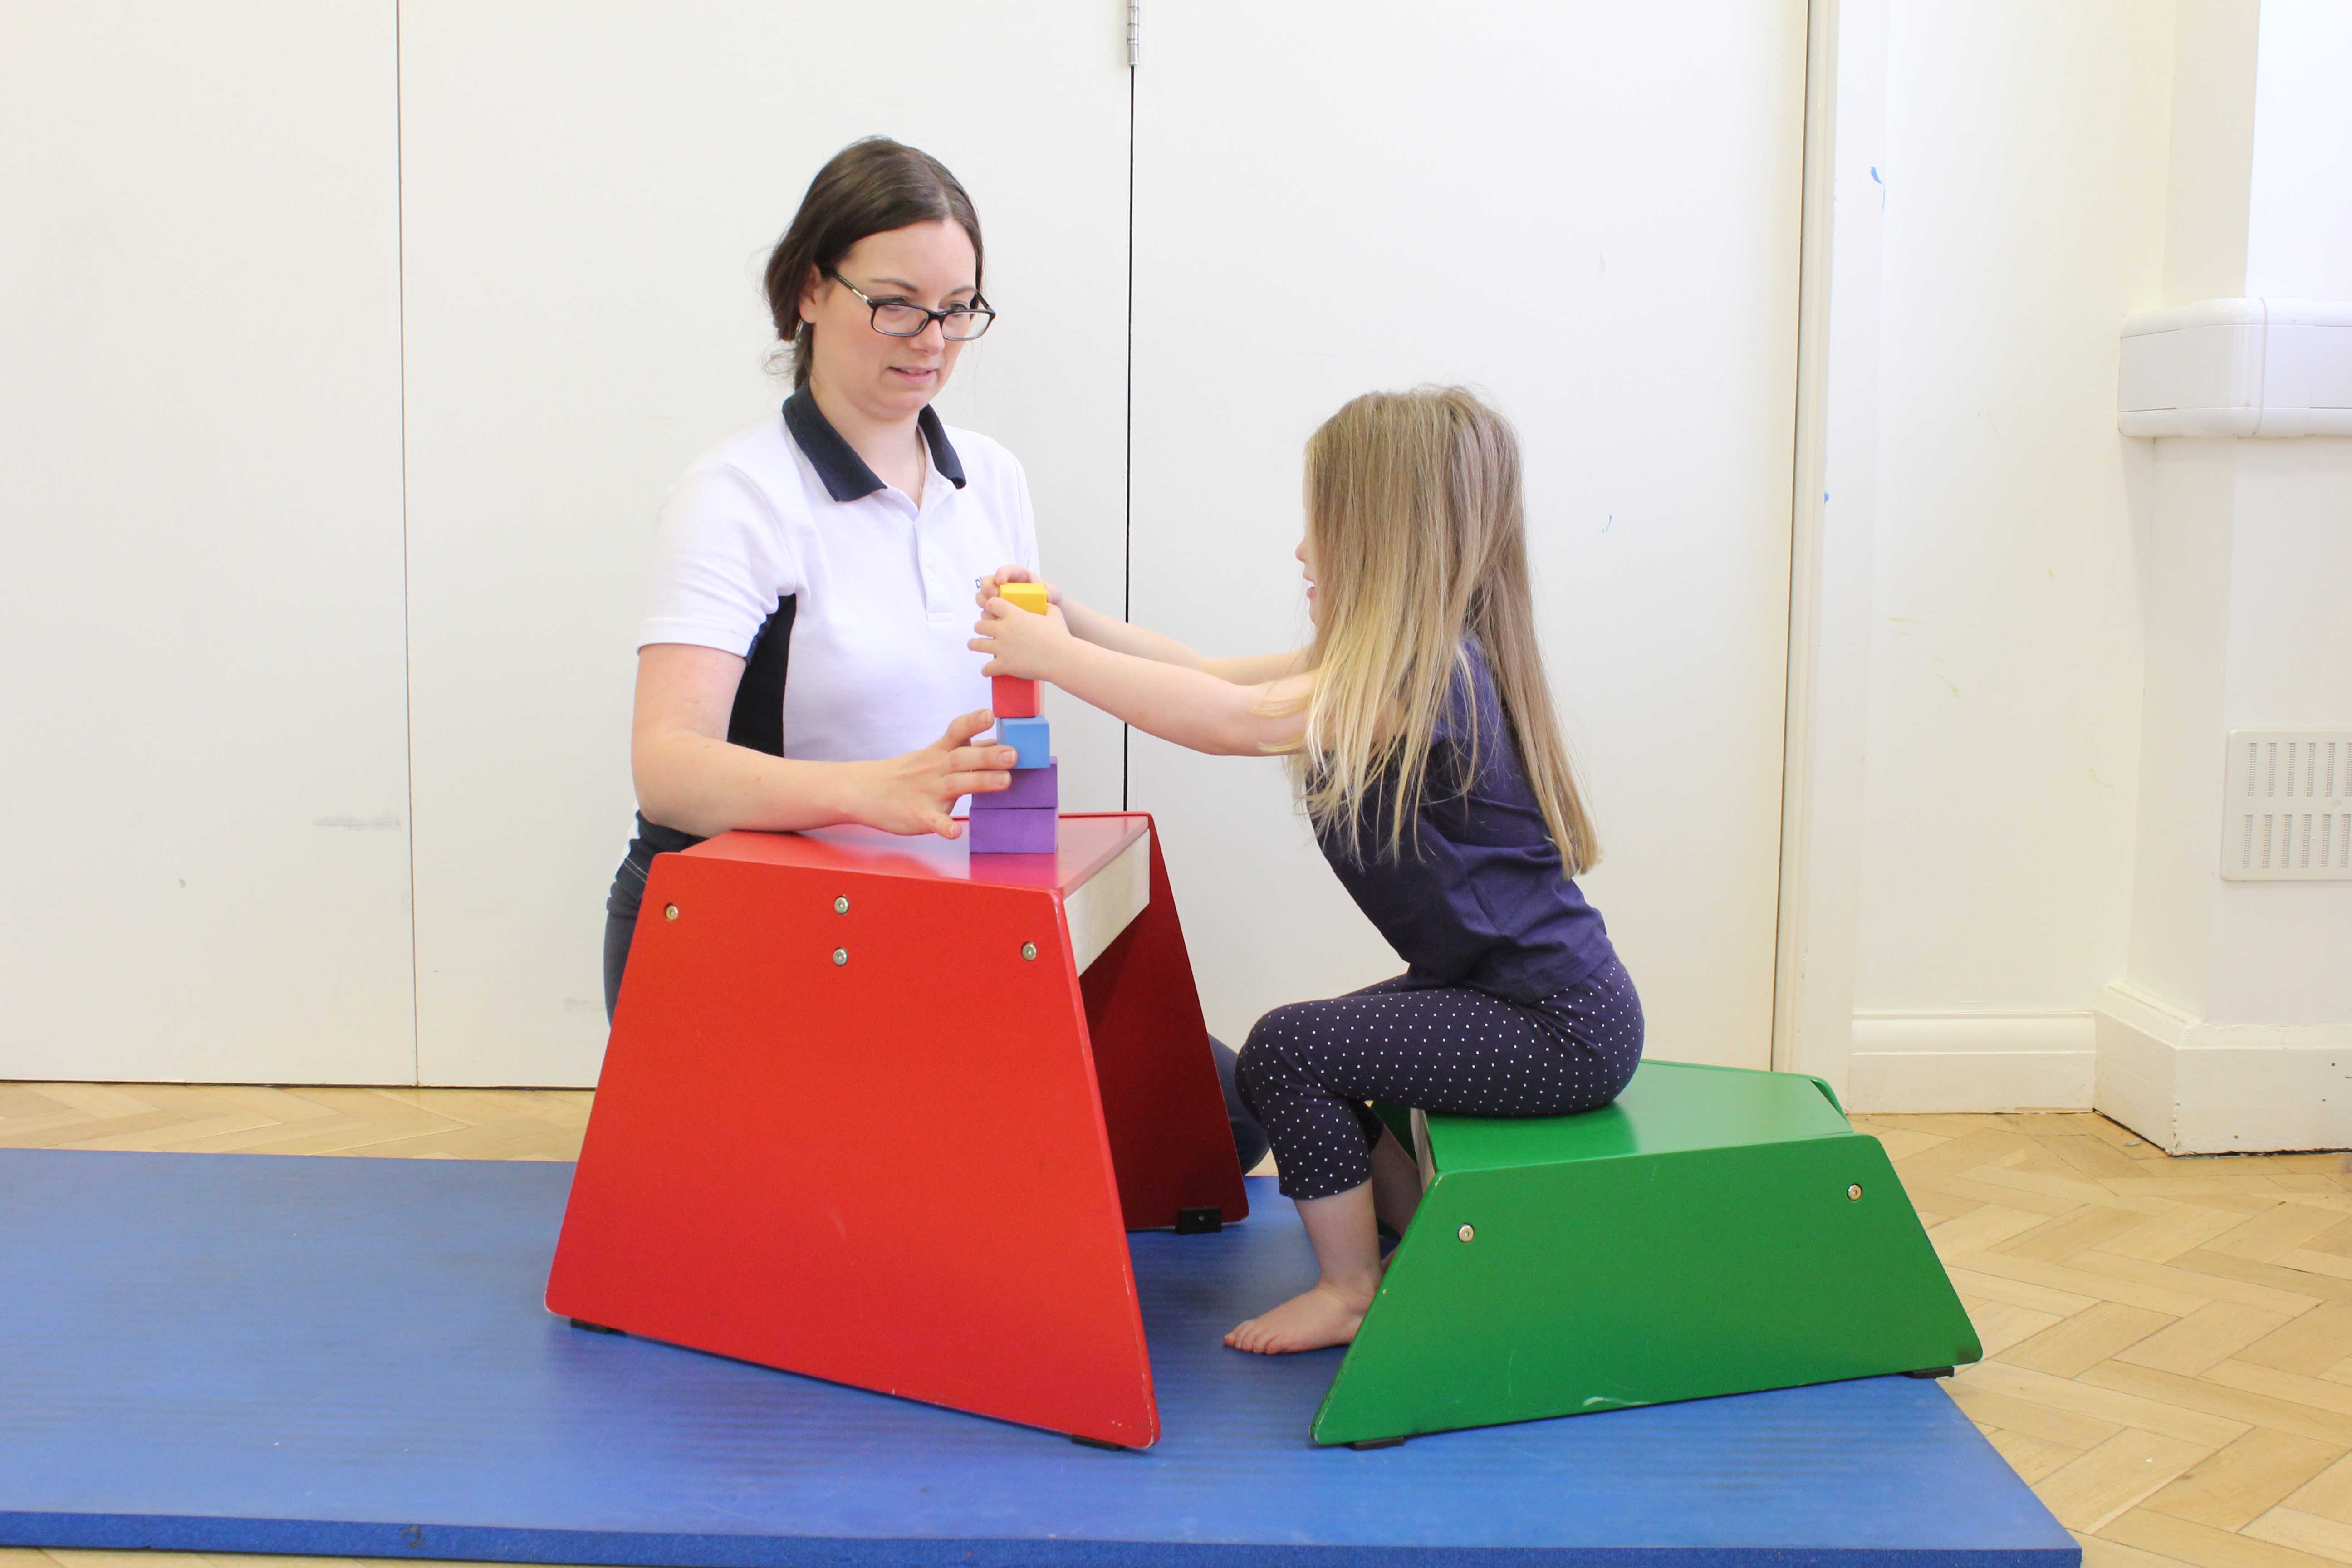 Developing sensory understanding through active play assisted by a physiotherapist